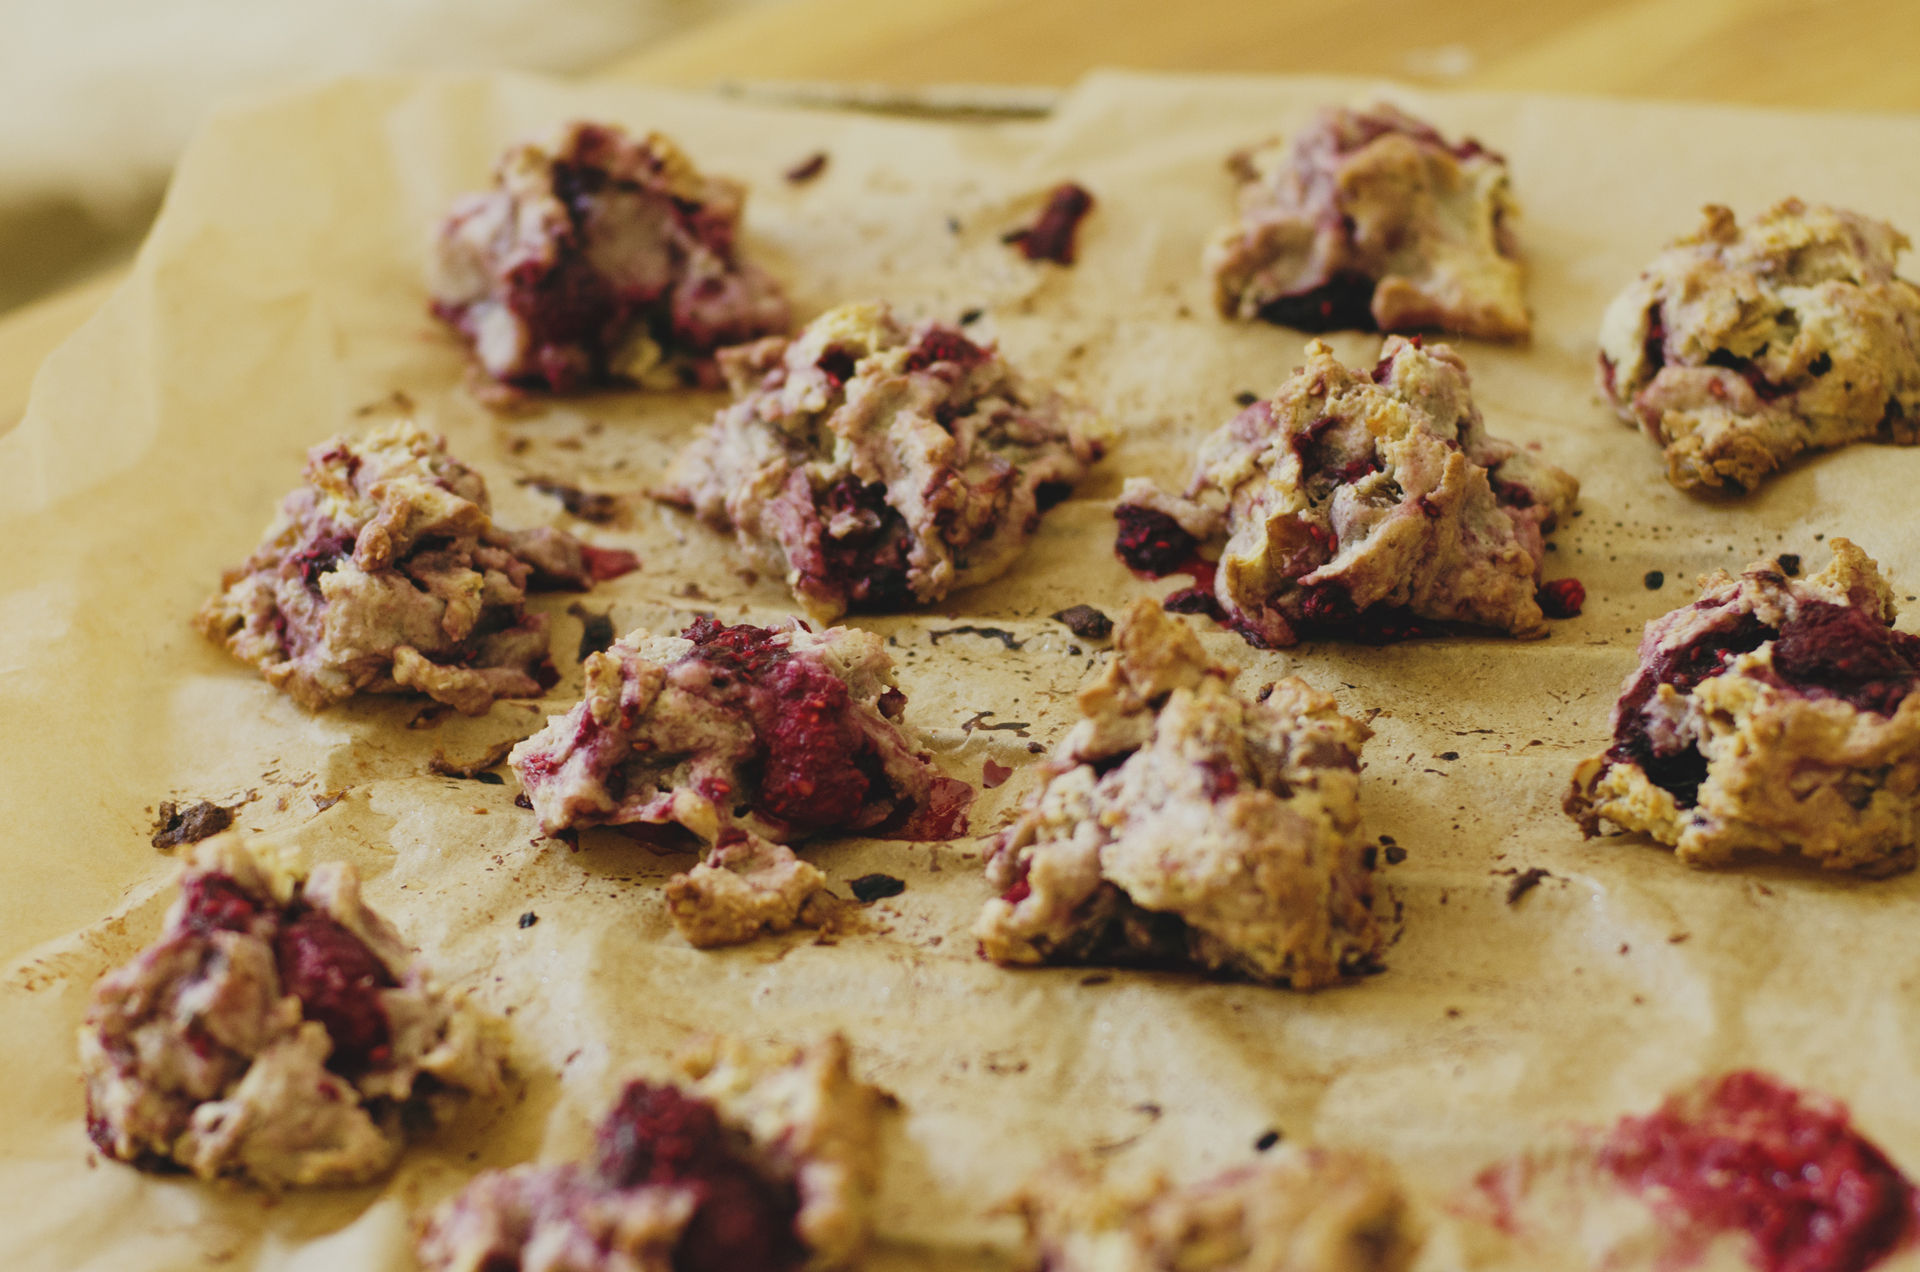 Sophie Hechinger shares her Wholesome Cashew Nut and Raspberry Cookies with Foodadit in Berlin